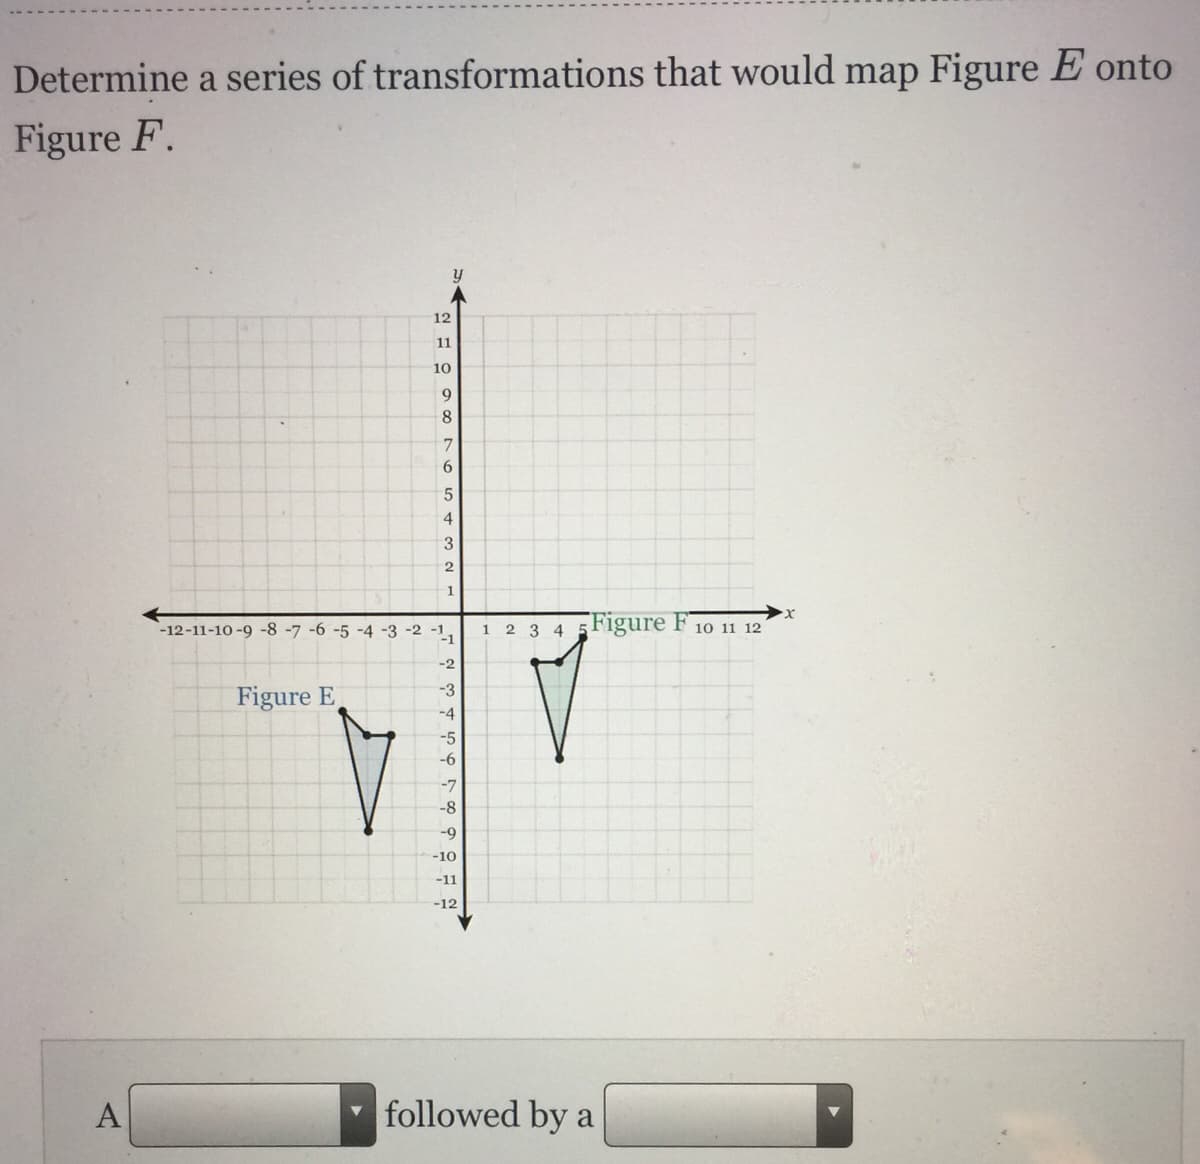 Determine a series of transformations that would map Figure E onto
Figure F.
12
11
10
9
8
6
4
3
1
Figure F
-12-11-10 -9 -8 -7 -6 -5 -4 -3 -2
-1
10 11 12
1.
2 3 4
-2
-3
Figure E
-4
-5
-6
-7
-8
-9
-10
-11
-12
A
followed by a
